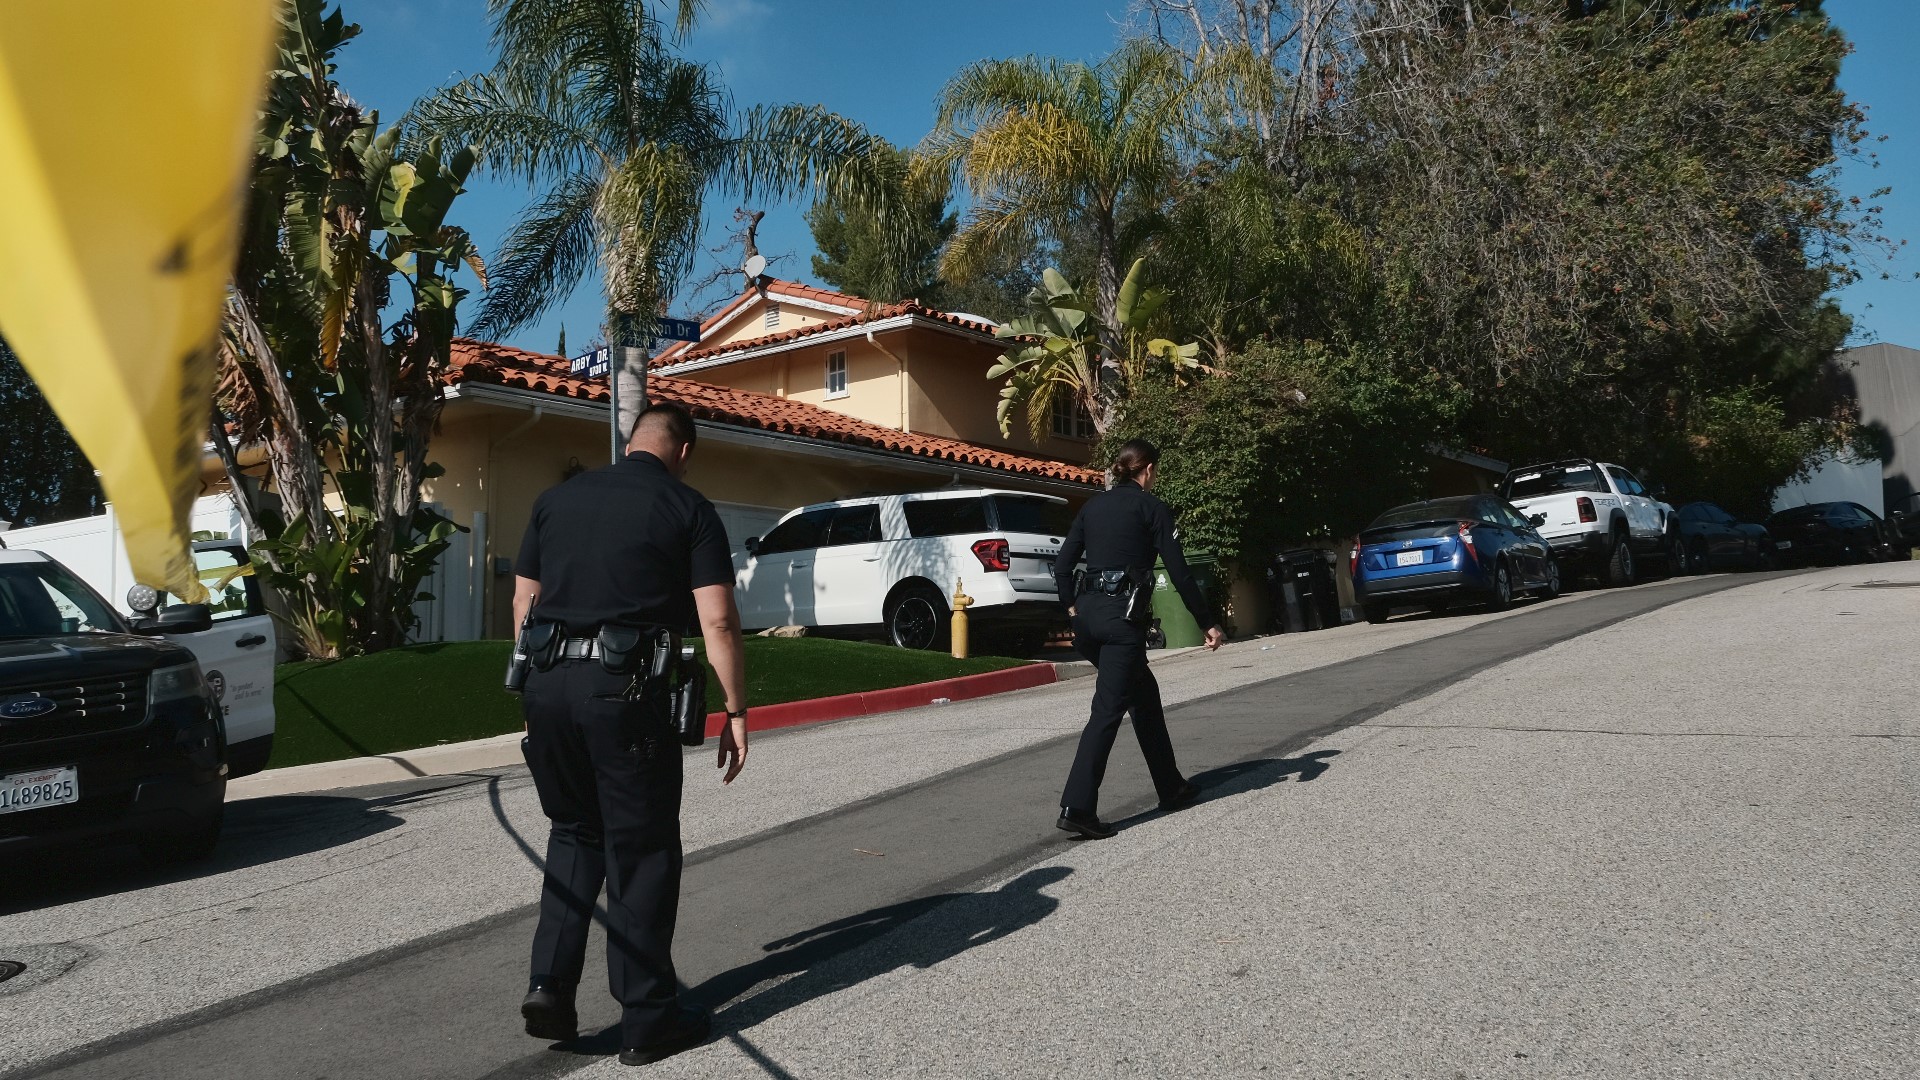 The shooting happened overnight in Beverly Crest, an upscale Los Angeles neighborhood.